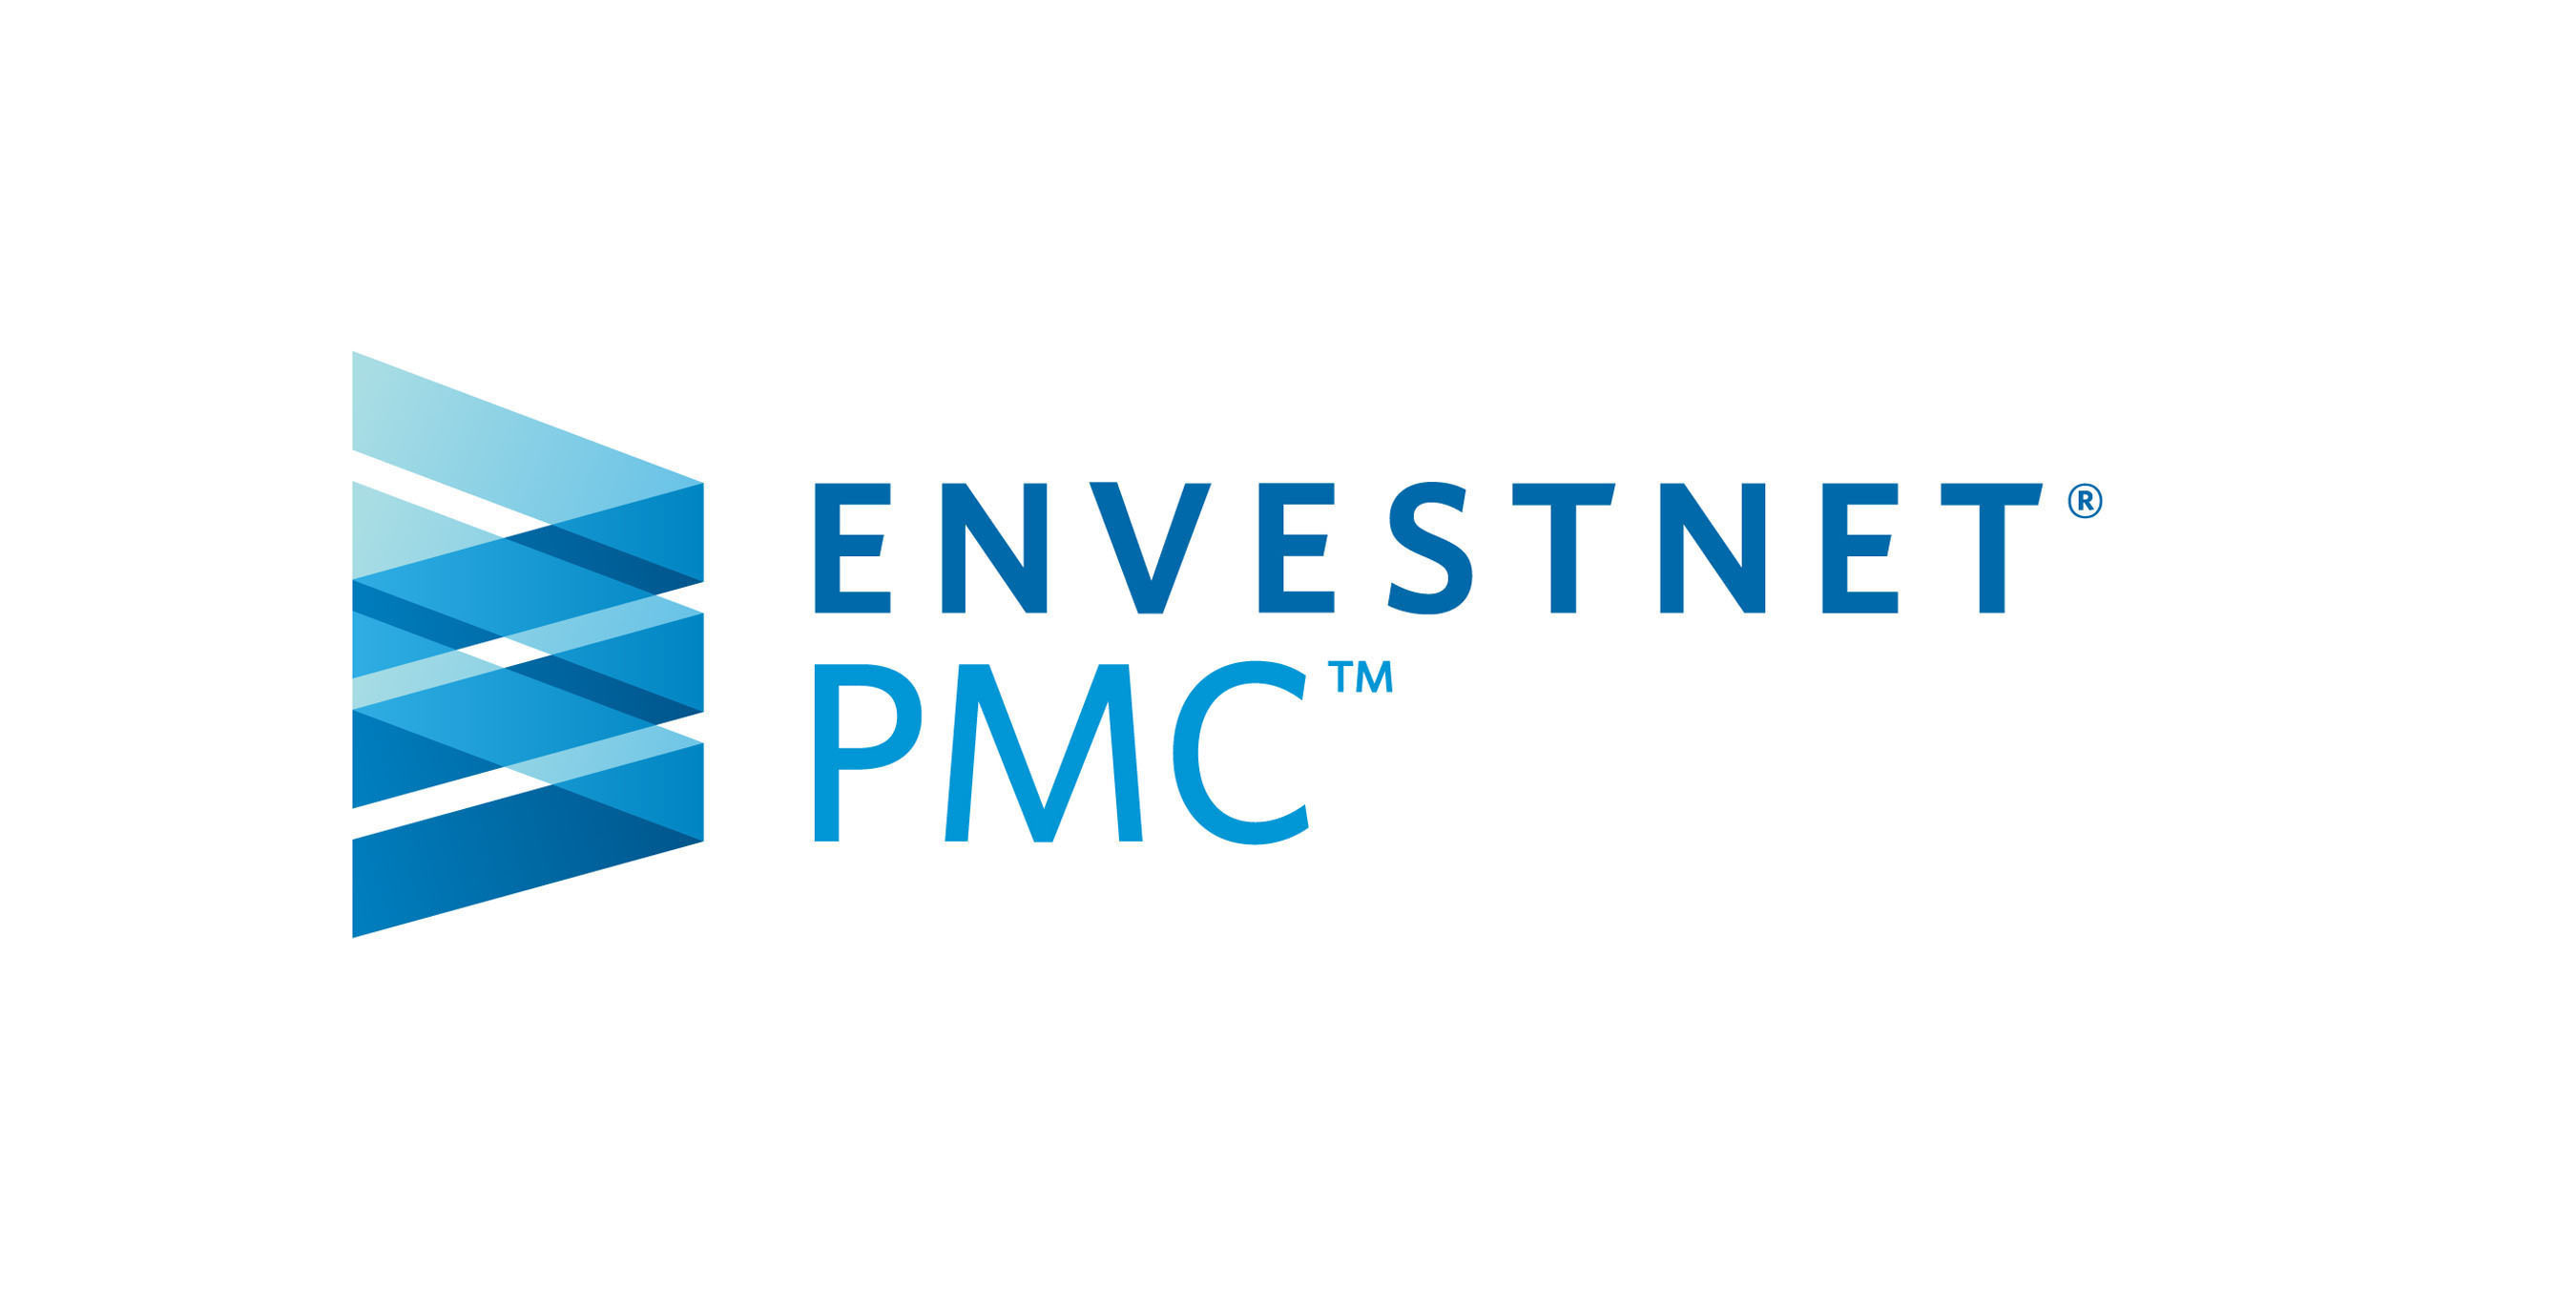 Envestnet | PMC provides independent advisors, broker-dealers, and institutional investors with the research, expertise, and investment solutions - from due diligence and comprehensive manager research to portfolio consulting and portfolio management - they need to help improve client outcomes. For more information on Envestnet | PMC, please visit http://www.investpmc.com/.